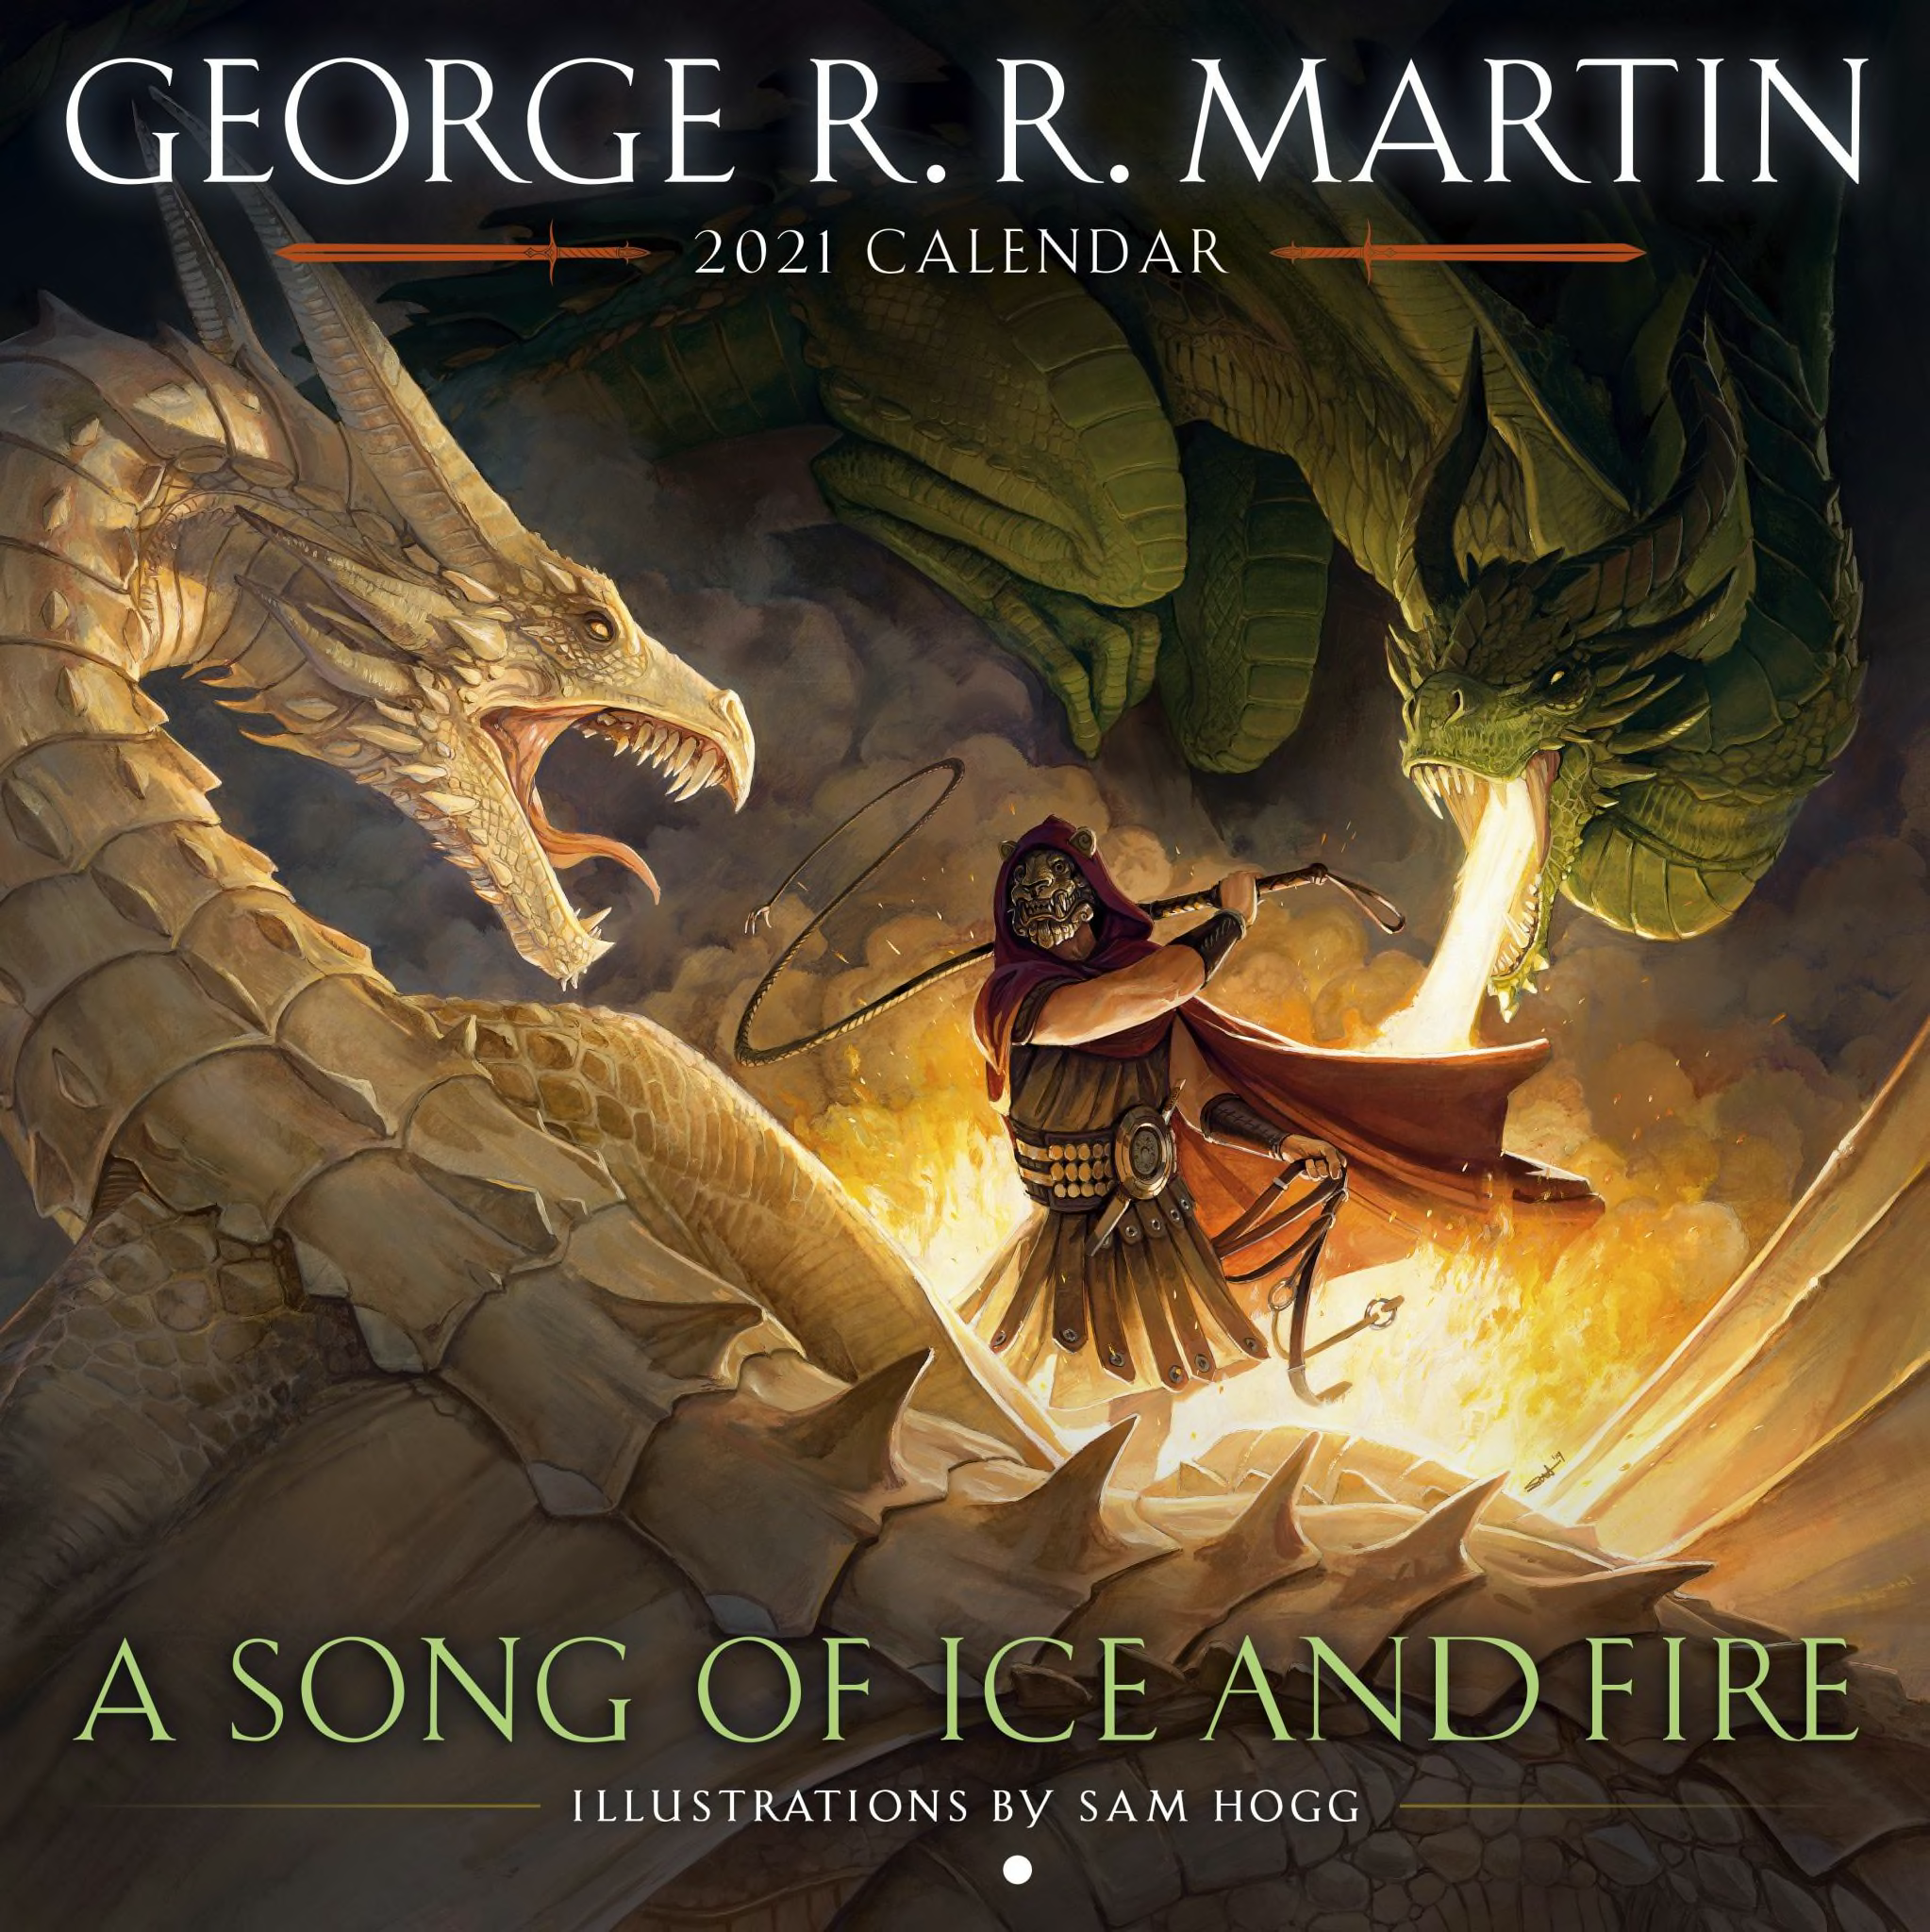 Check Out The Gorgeous Cover Of The 2021 A Song Of Ice And Fire Calendar